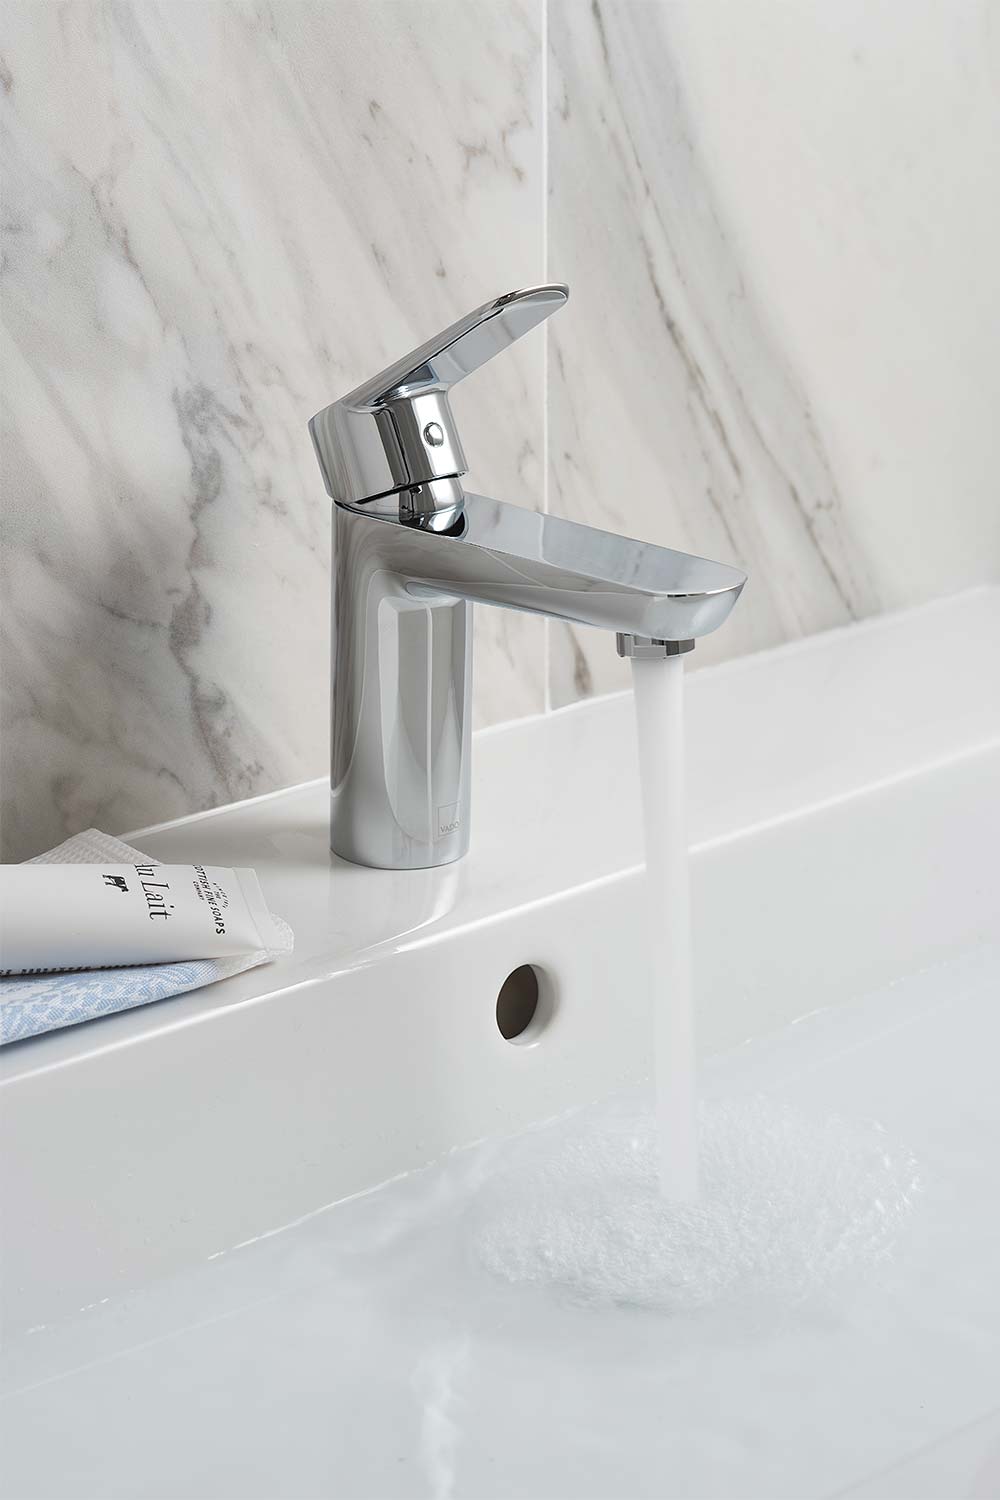 Single lever mono basin mixer with water flowing from the spout on a white basin with a marble tiled wall.